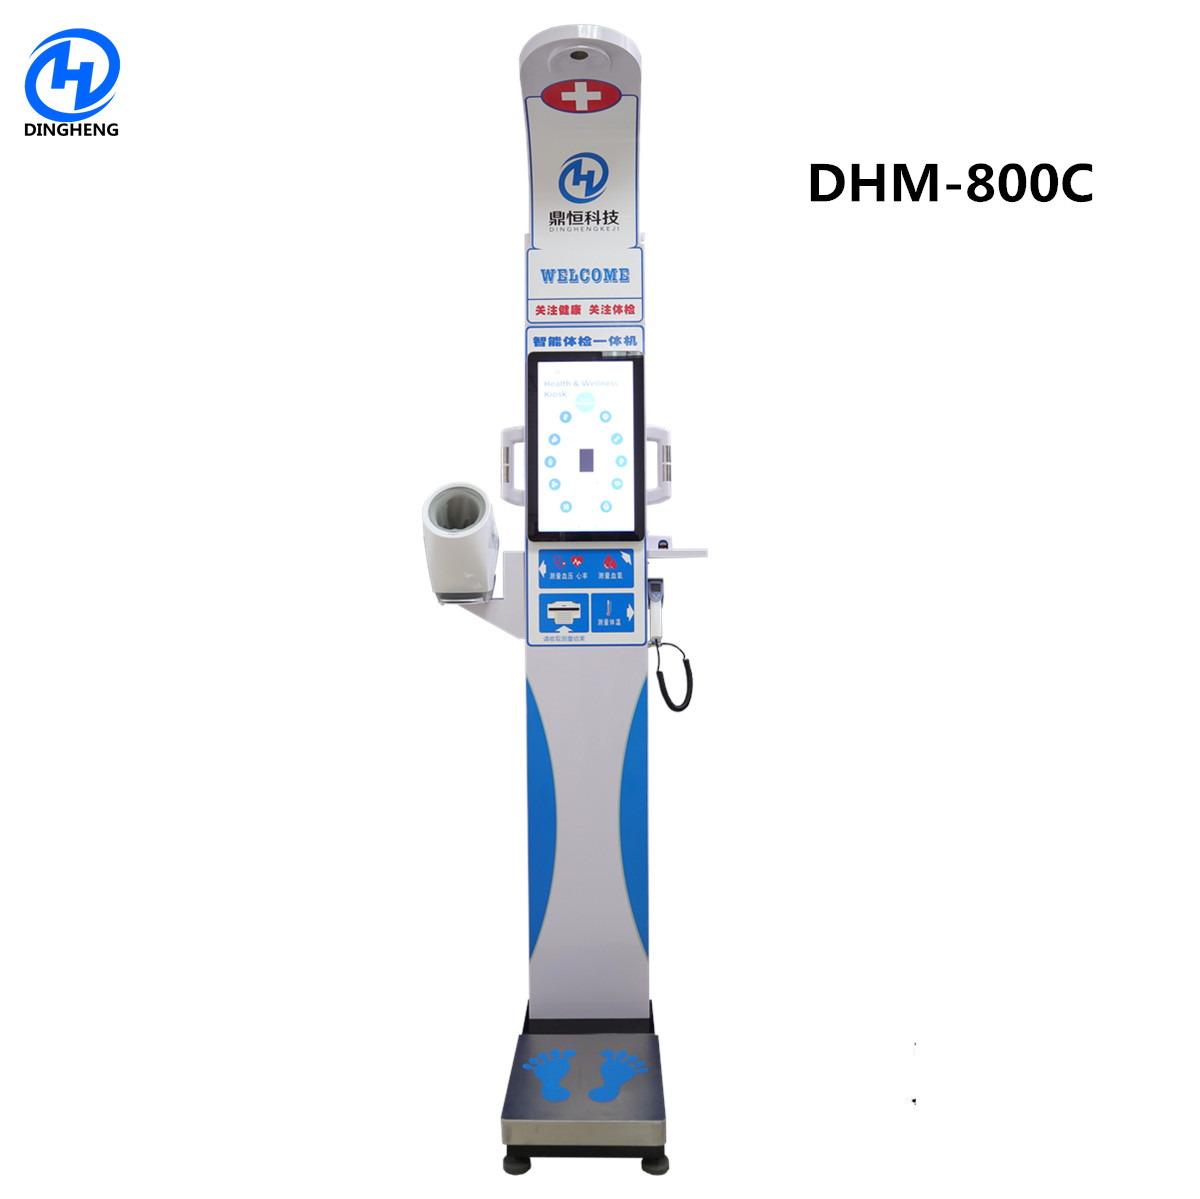  DHM-800c ultrasonic probe for height measurement adjust the height of blood pressure monitor health checkup station Manufactures